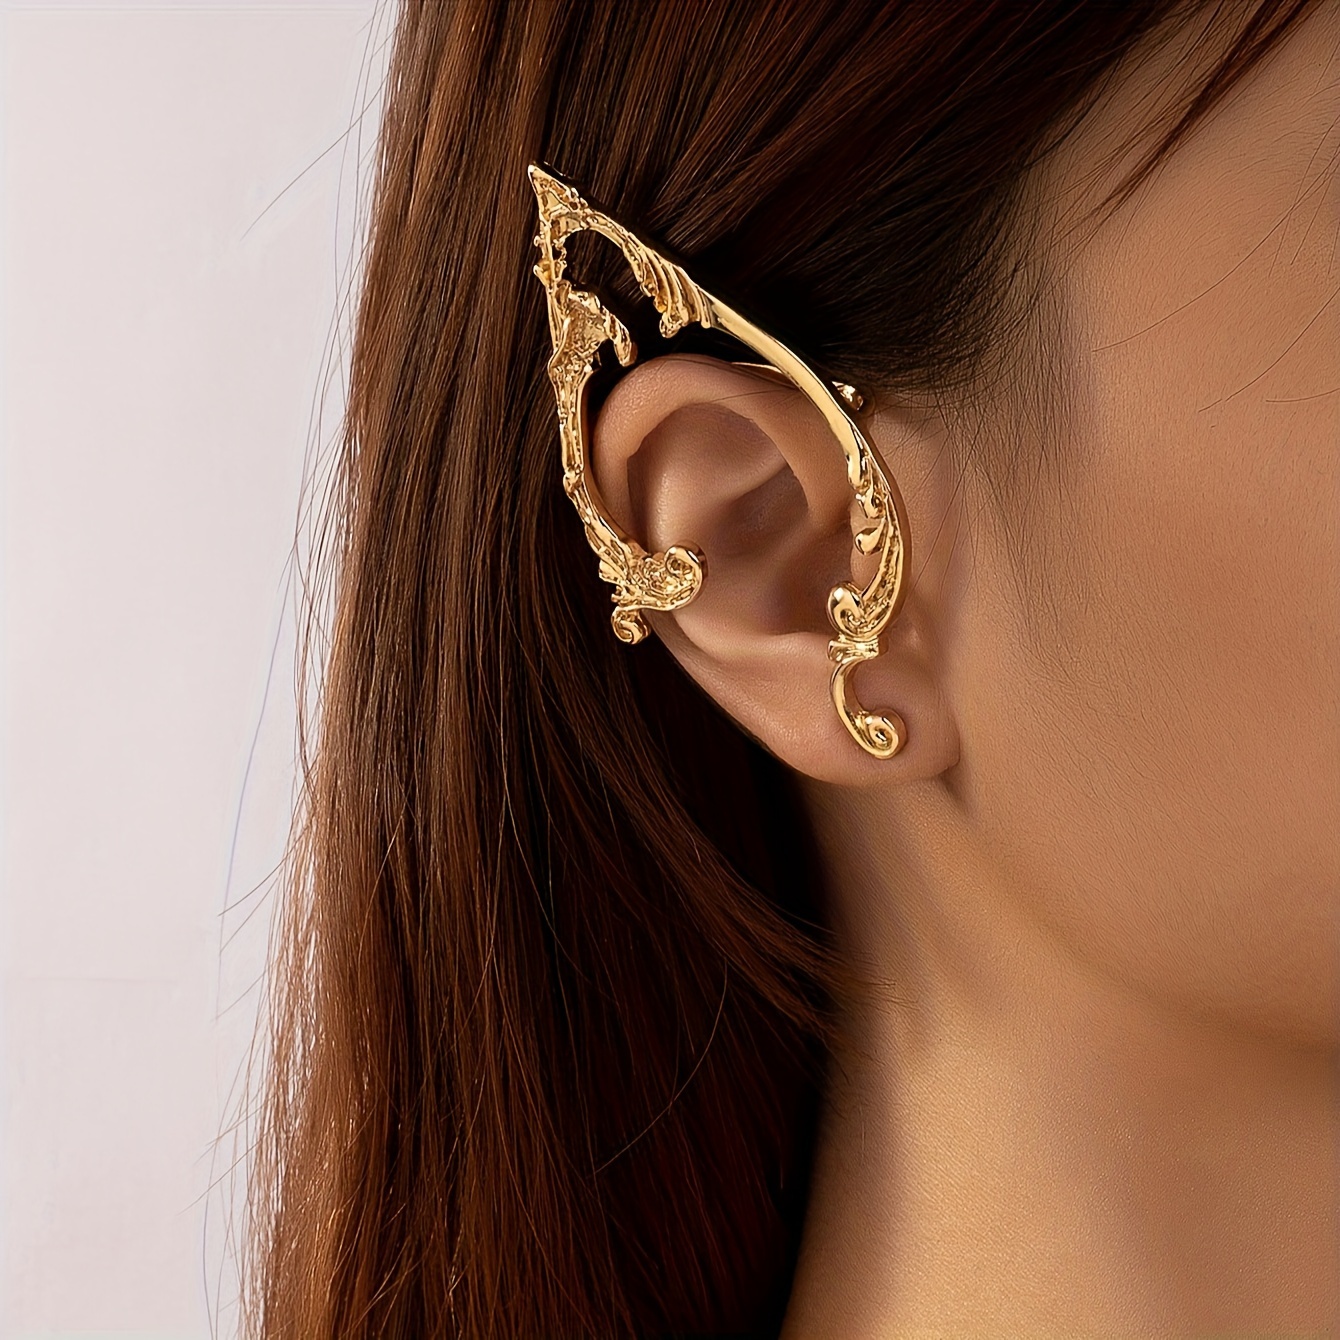 

Elf Ear Ear Cuff, Exquisite Trendy Luxury Ear Climber, Full Ear Wrap, Suitable For Daily Parties, Spring And Summer Dress Up, Cosplay Gift For Friends And Family